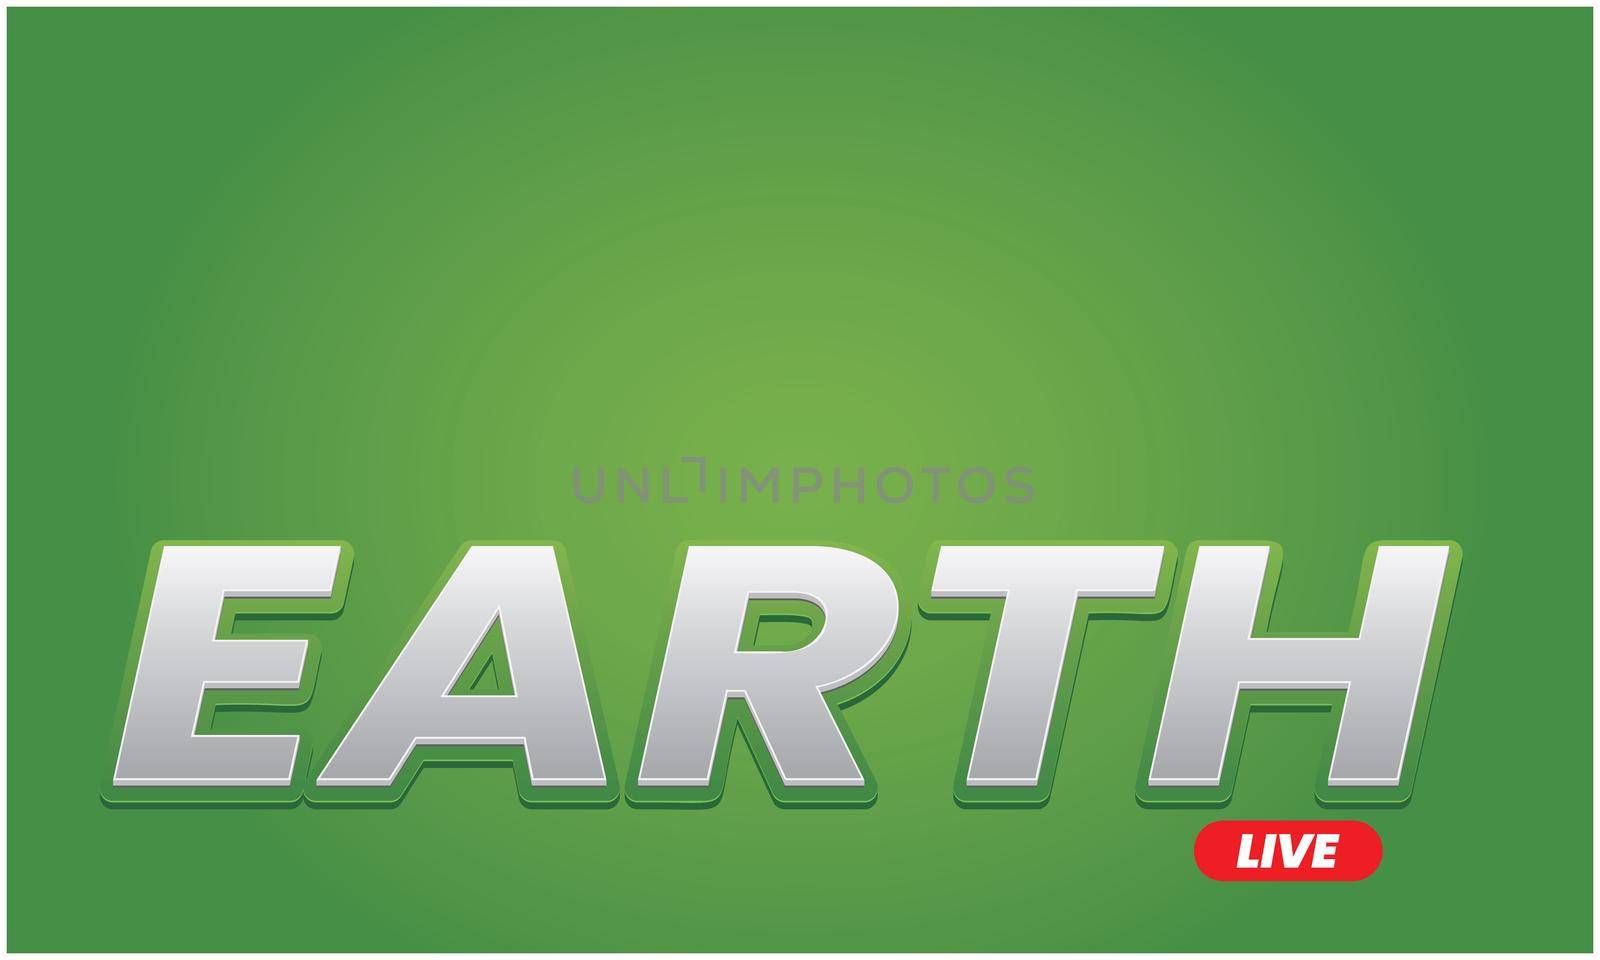 live from earth on abstract green background